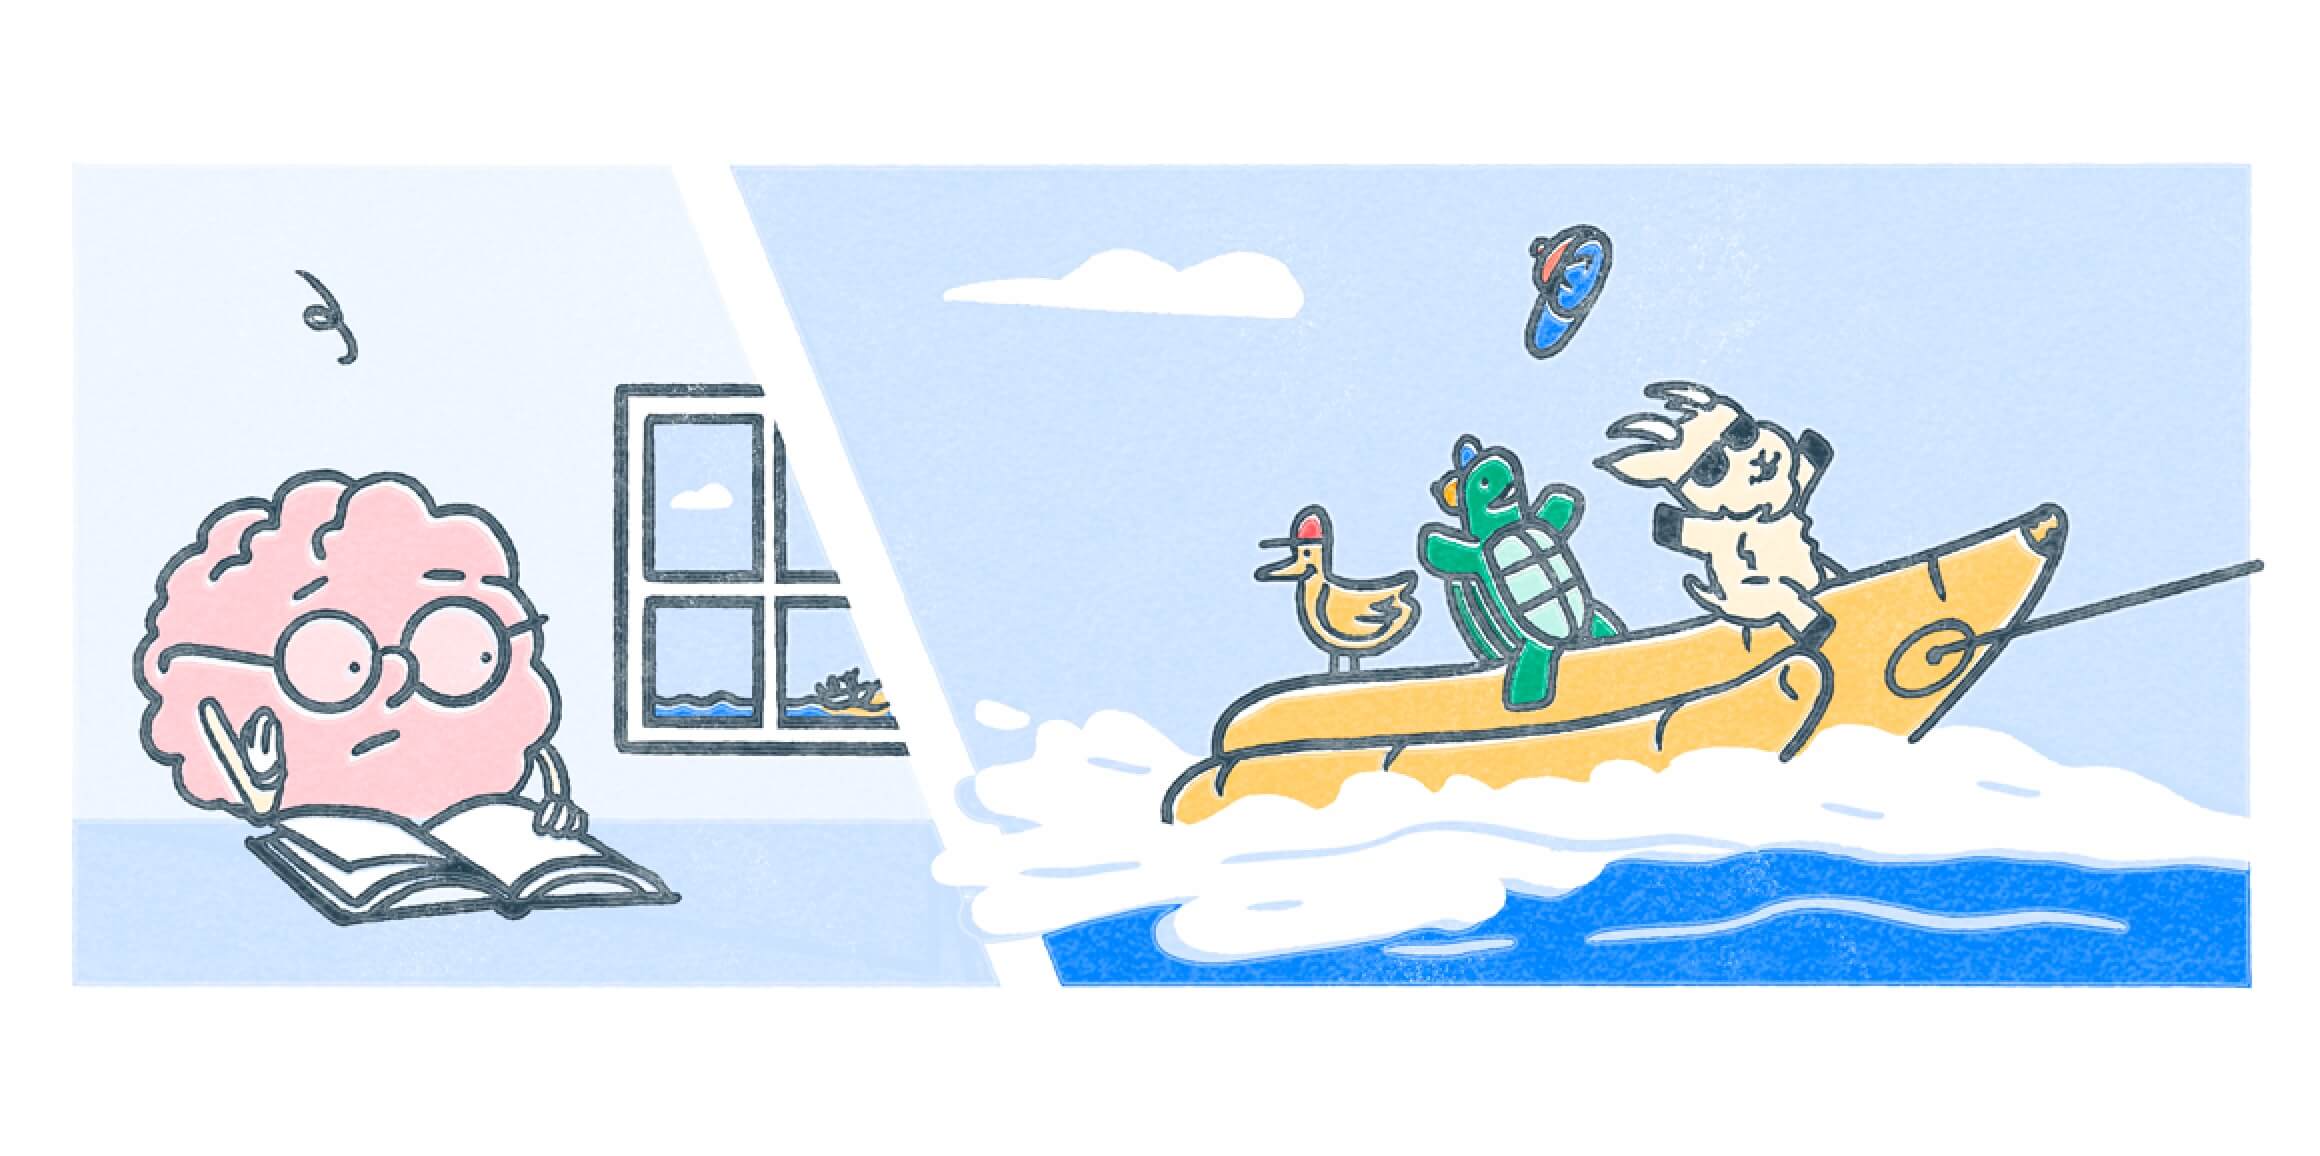 Split screen of a brain character trying to study with several characters riding a banana boat.